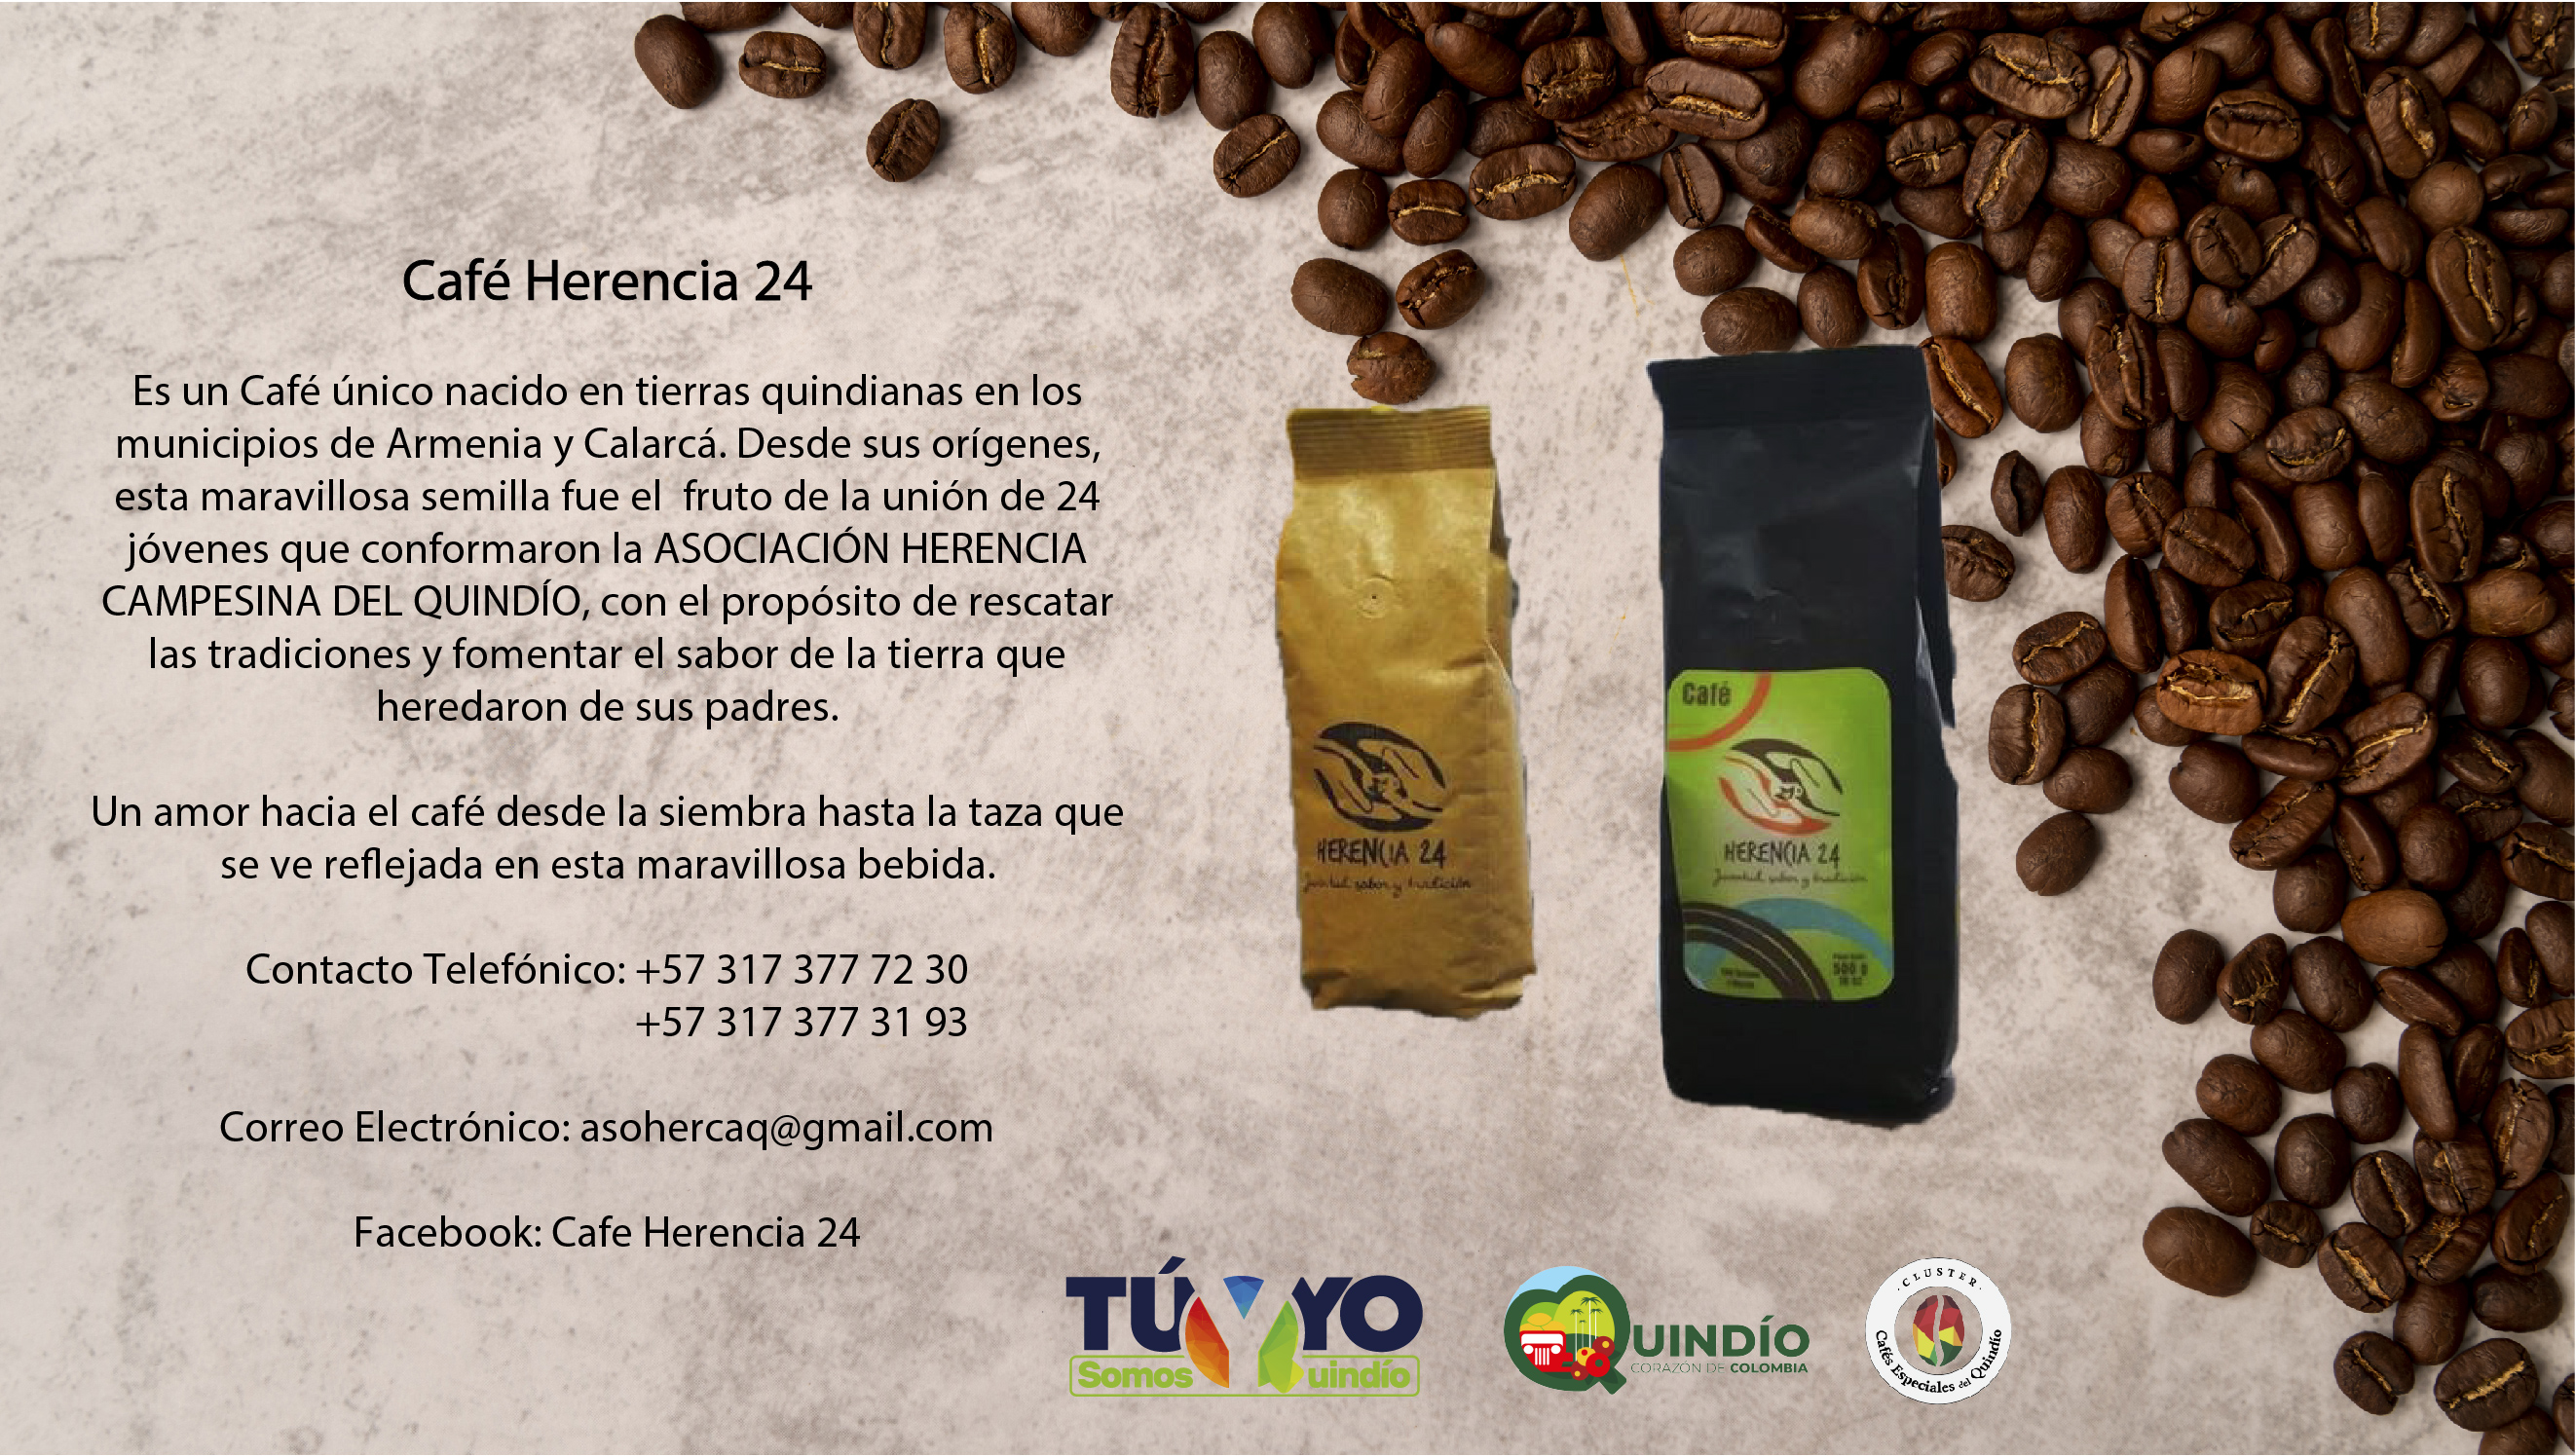 6. Cafe Herencia 24 01